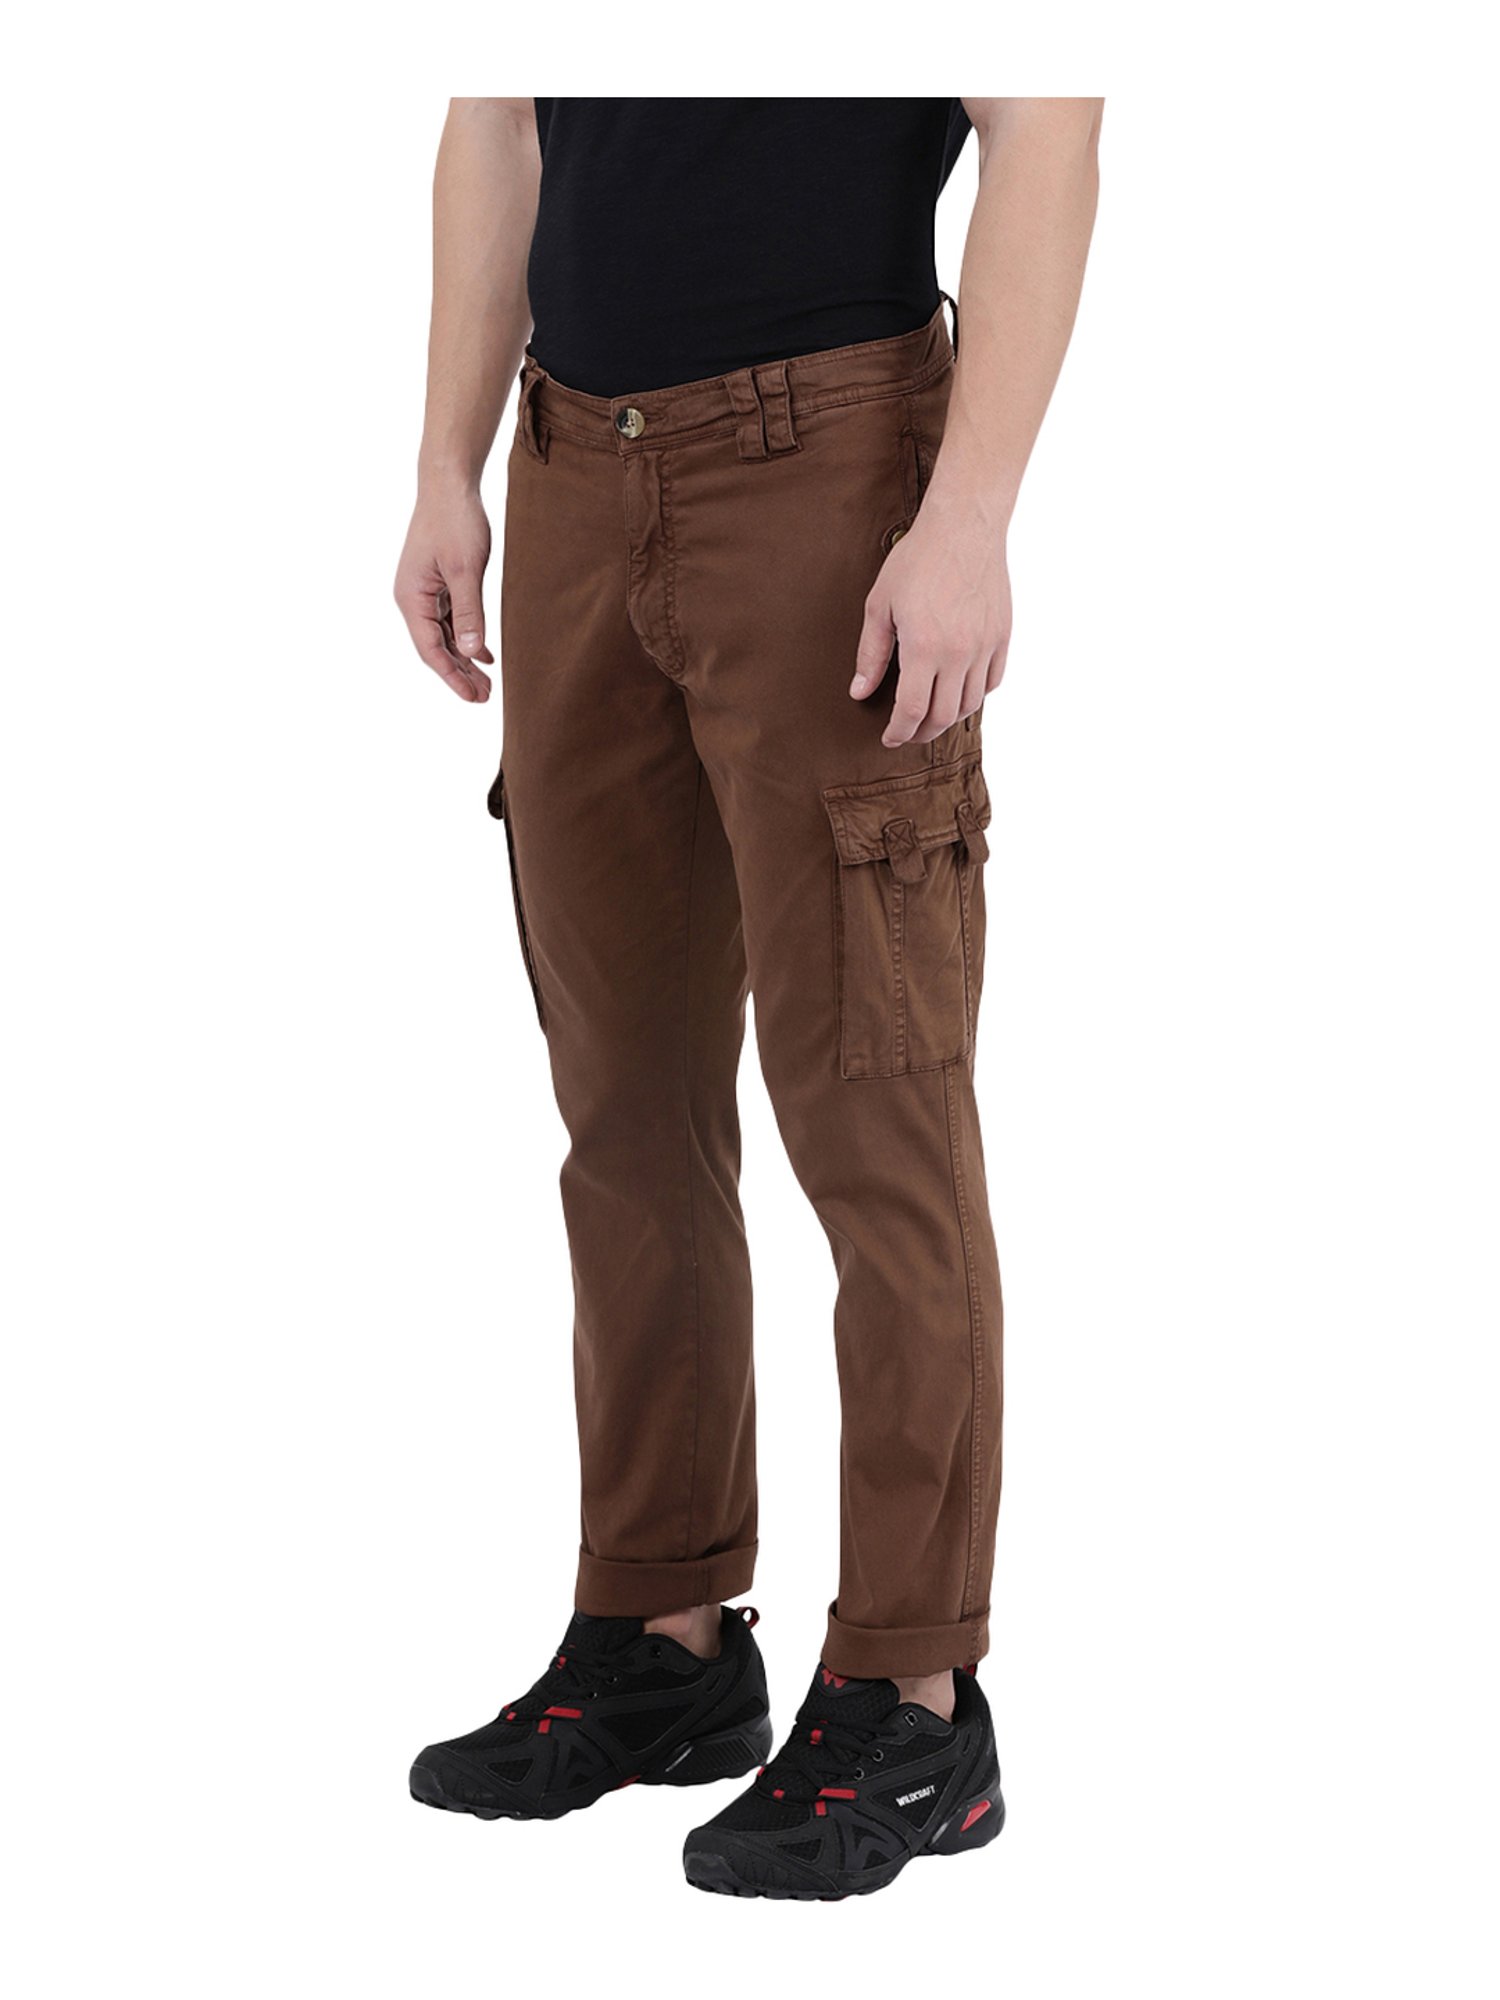 WILDCRAFT Men Convertible Pants LNVIOV0OWC8 (Size - 2XL, Grey) in Mumbai at  best price by Wildcraft - Justdial